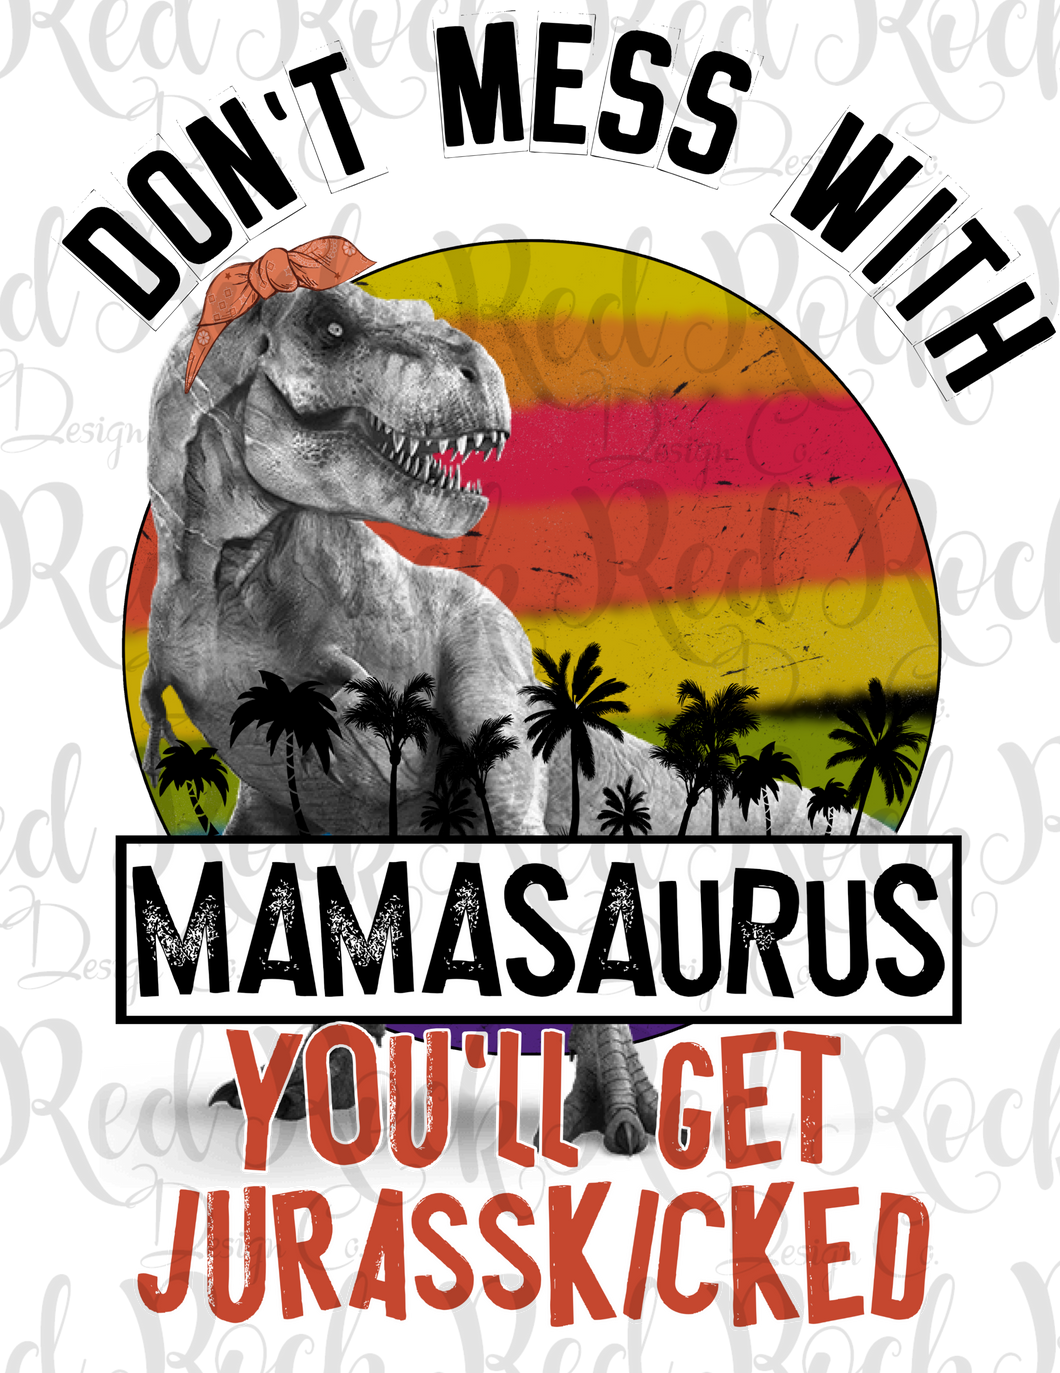 Don't mess with mamasaurus